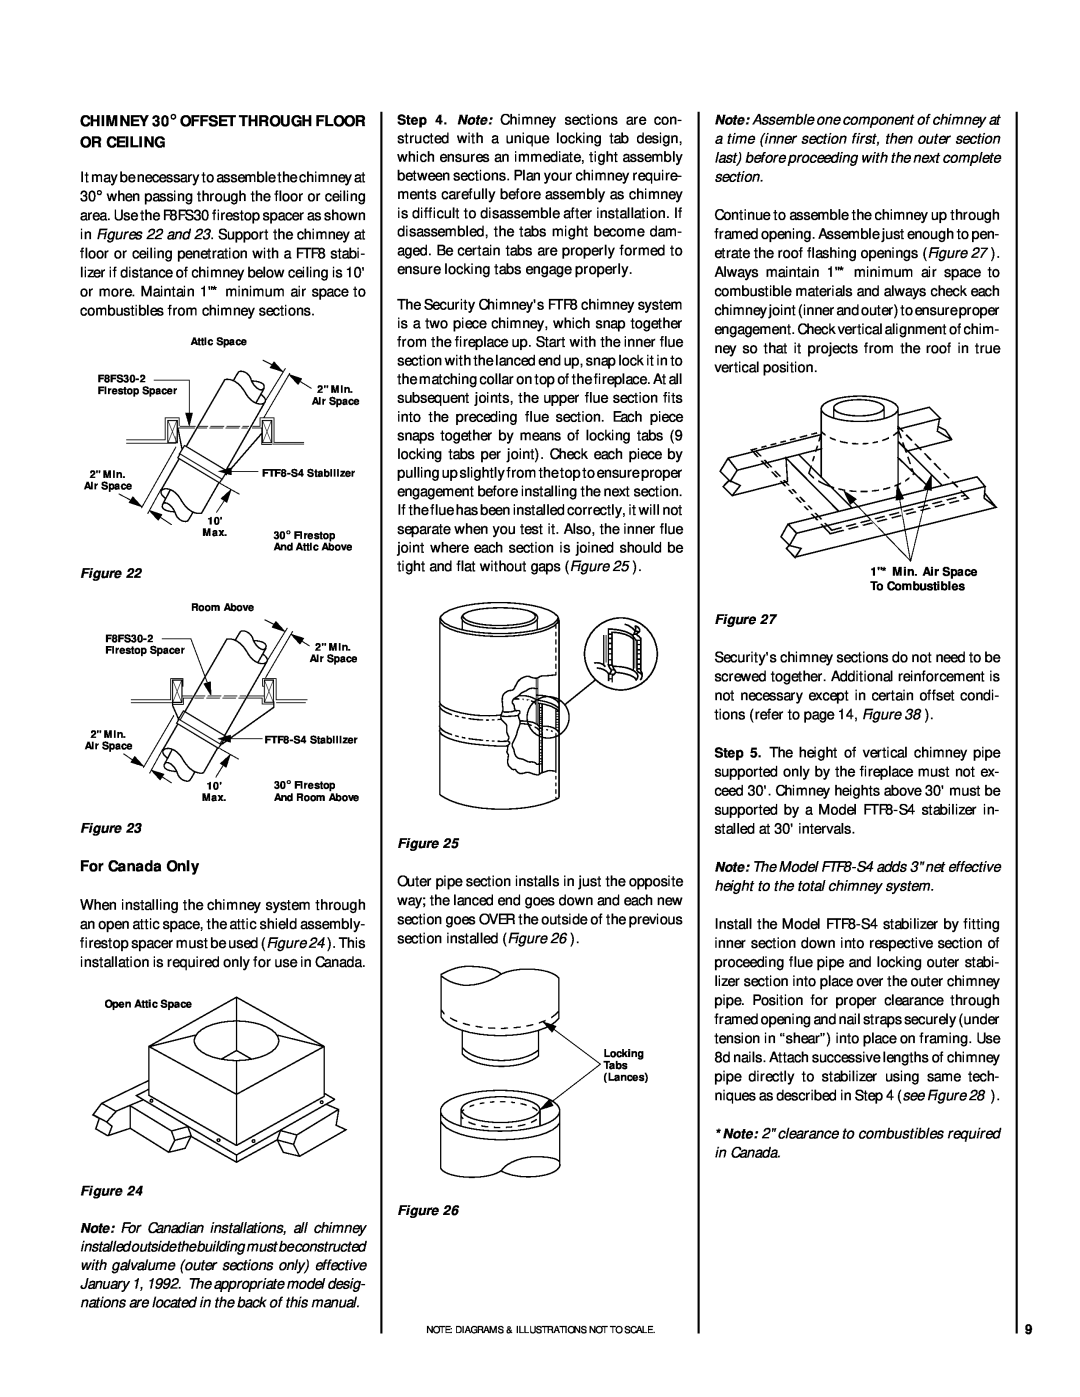 Superior BR-36-2, BCI-36, BC-36-2 installation instructions Or Ceiling, For Canada Only, CHIMNEY 30 OFFSET THROUGH FLOOR 